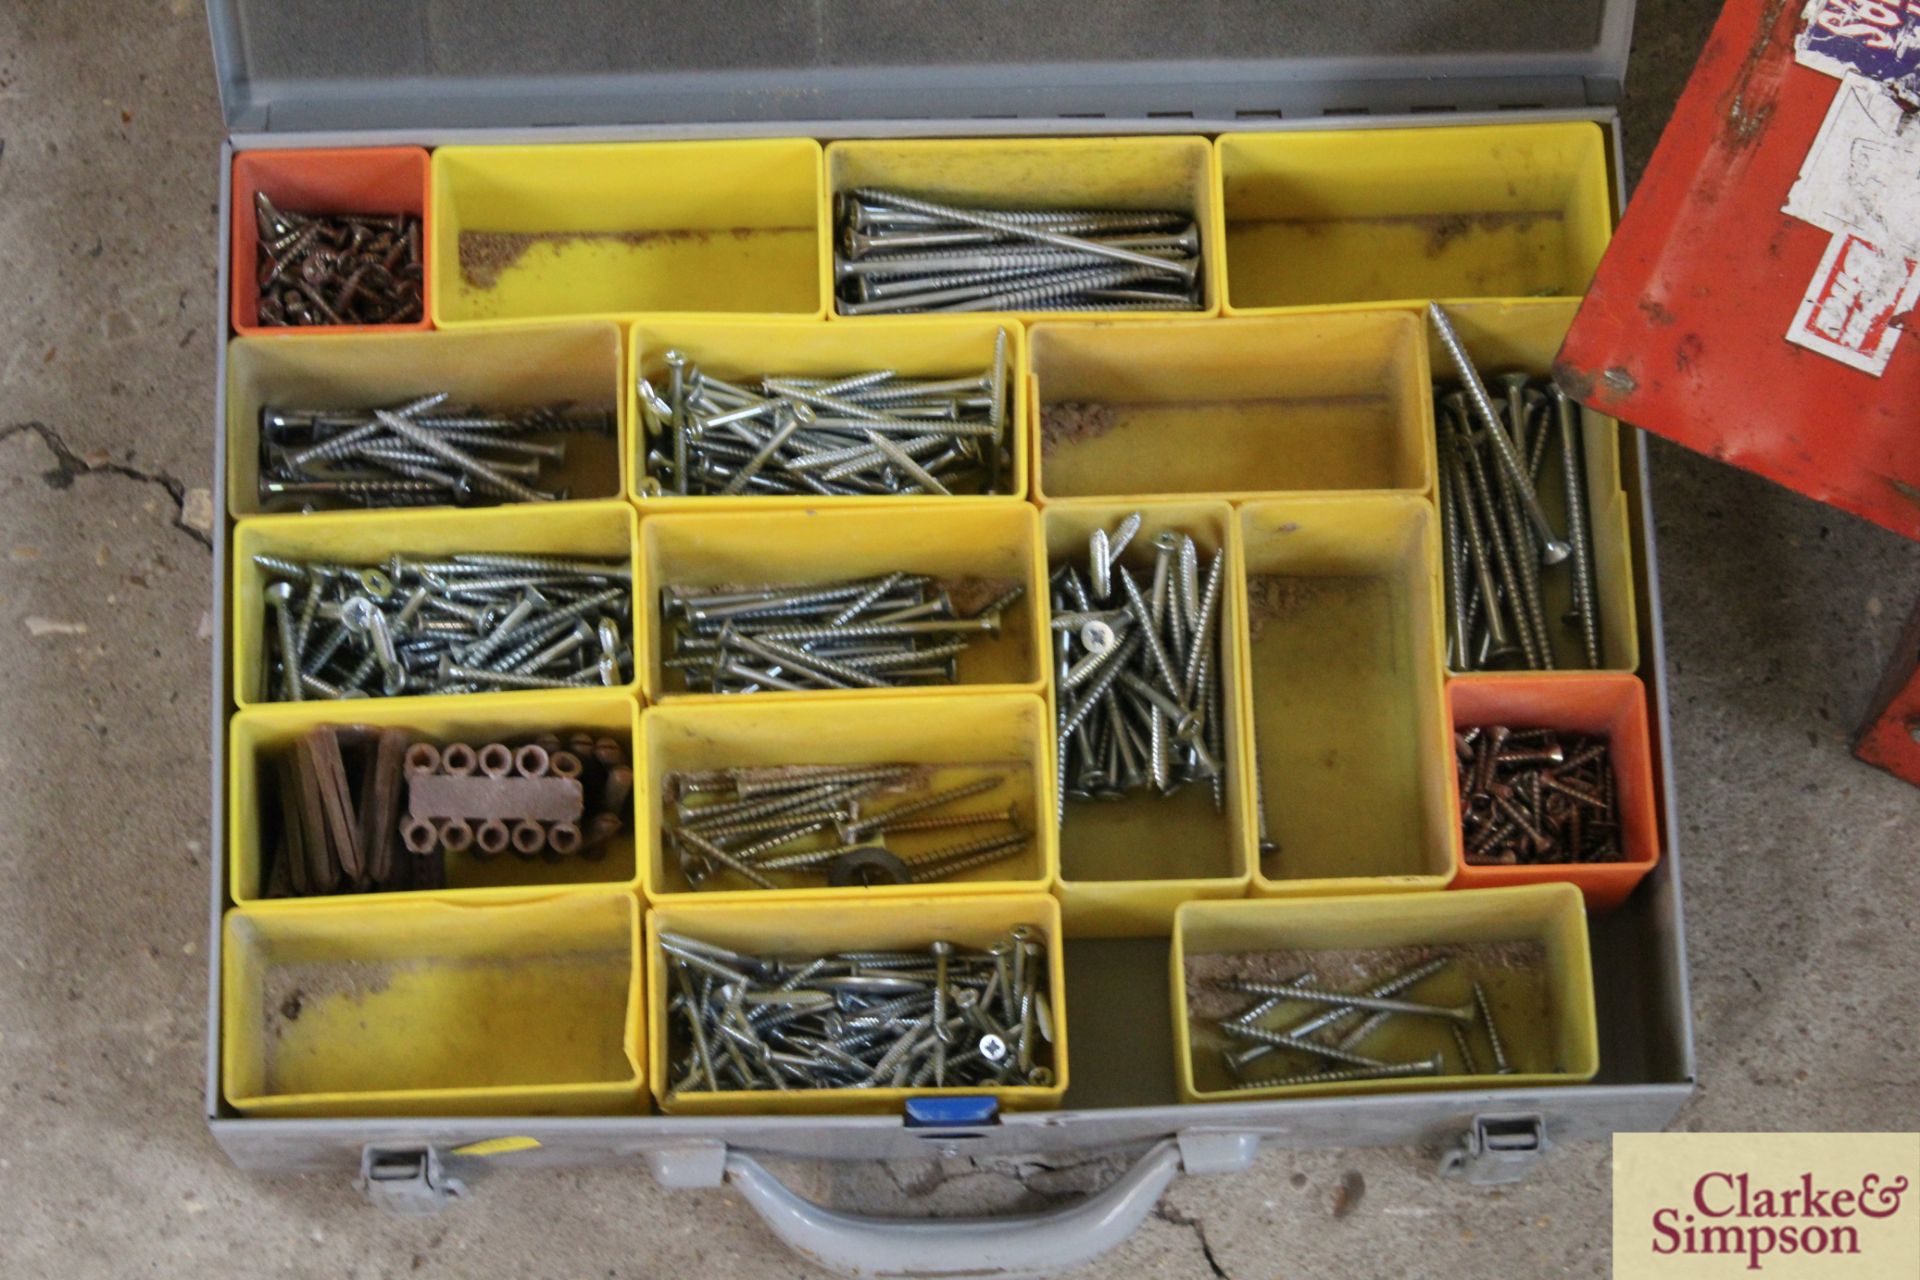 2x cases of various screws etc and cantilever toolbox of various bolts. - Image 3 of 6